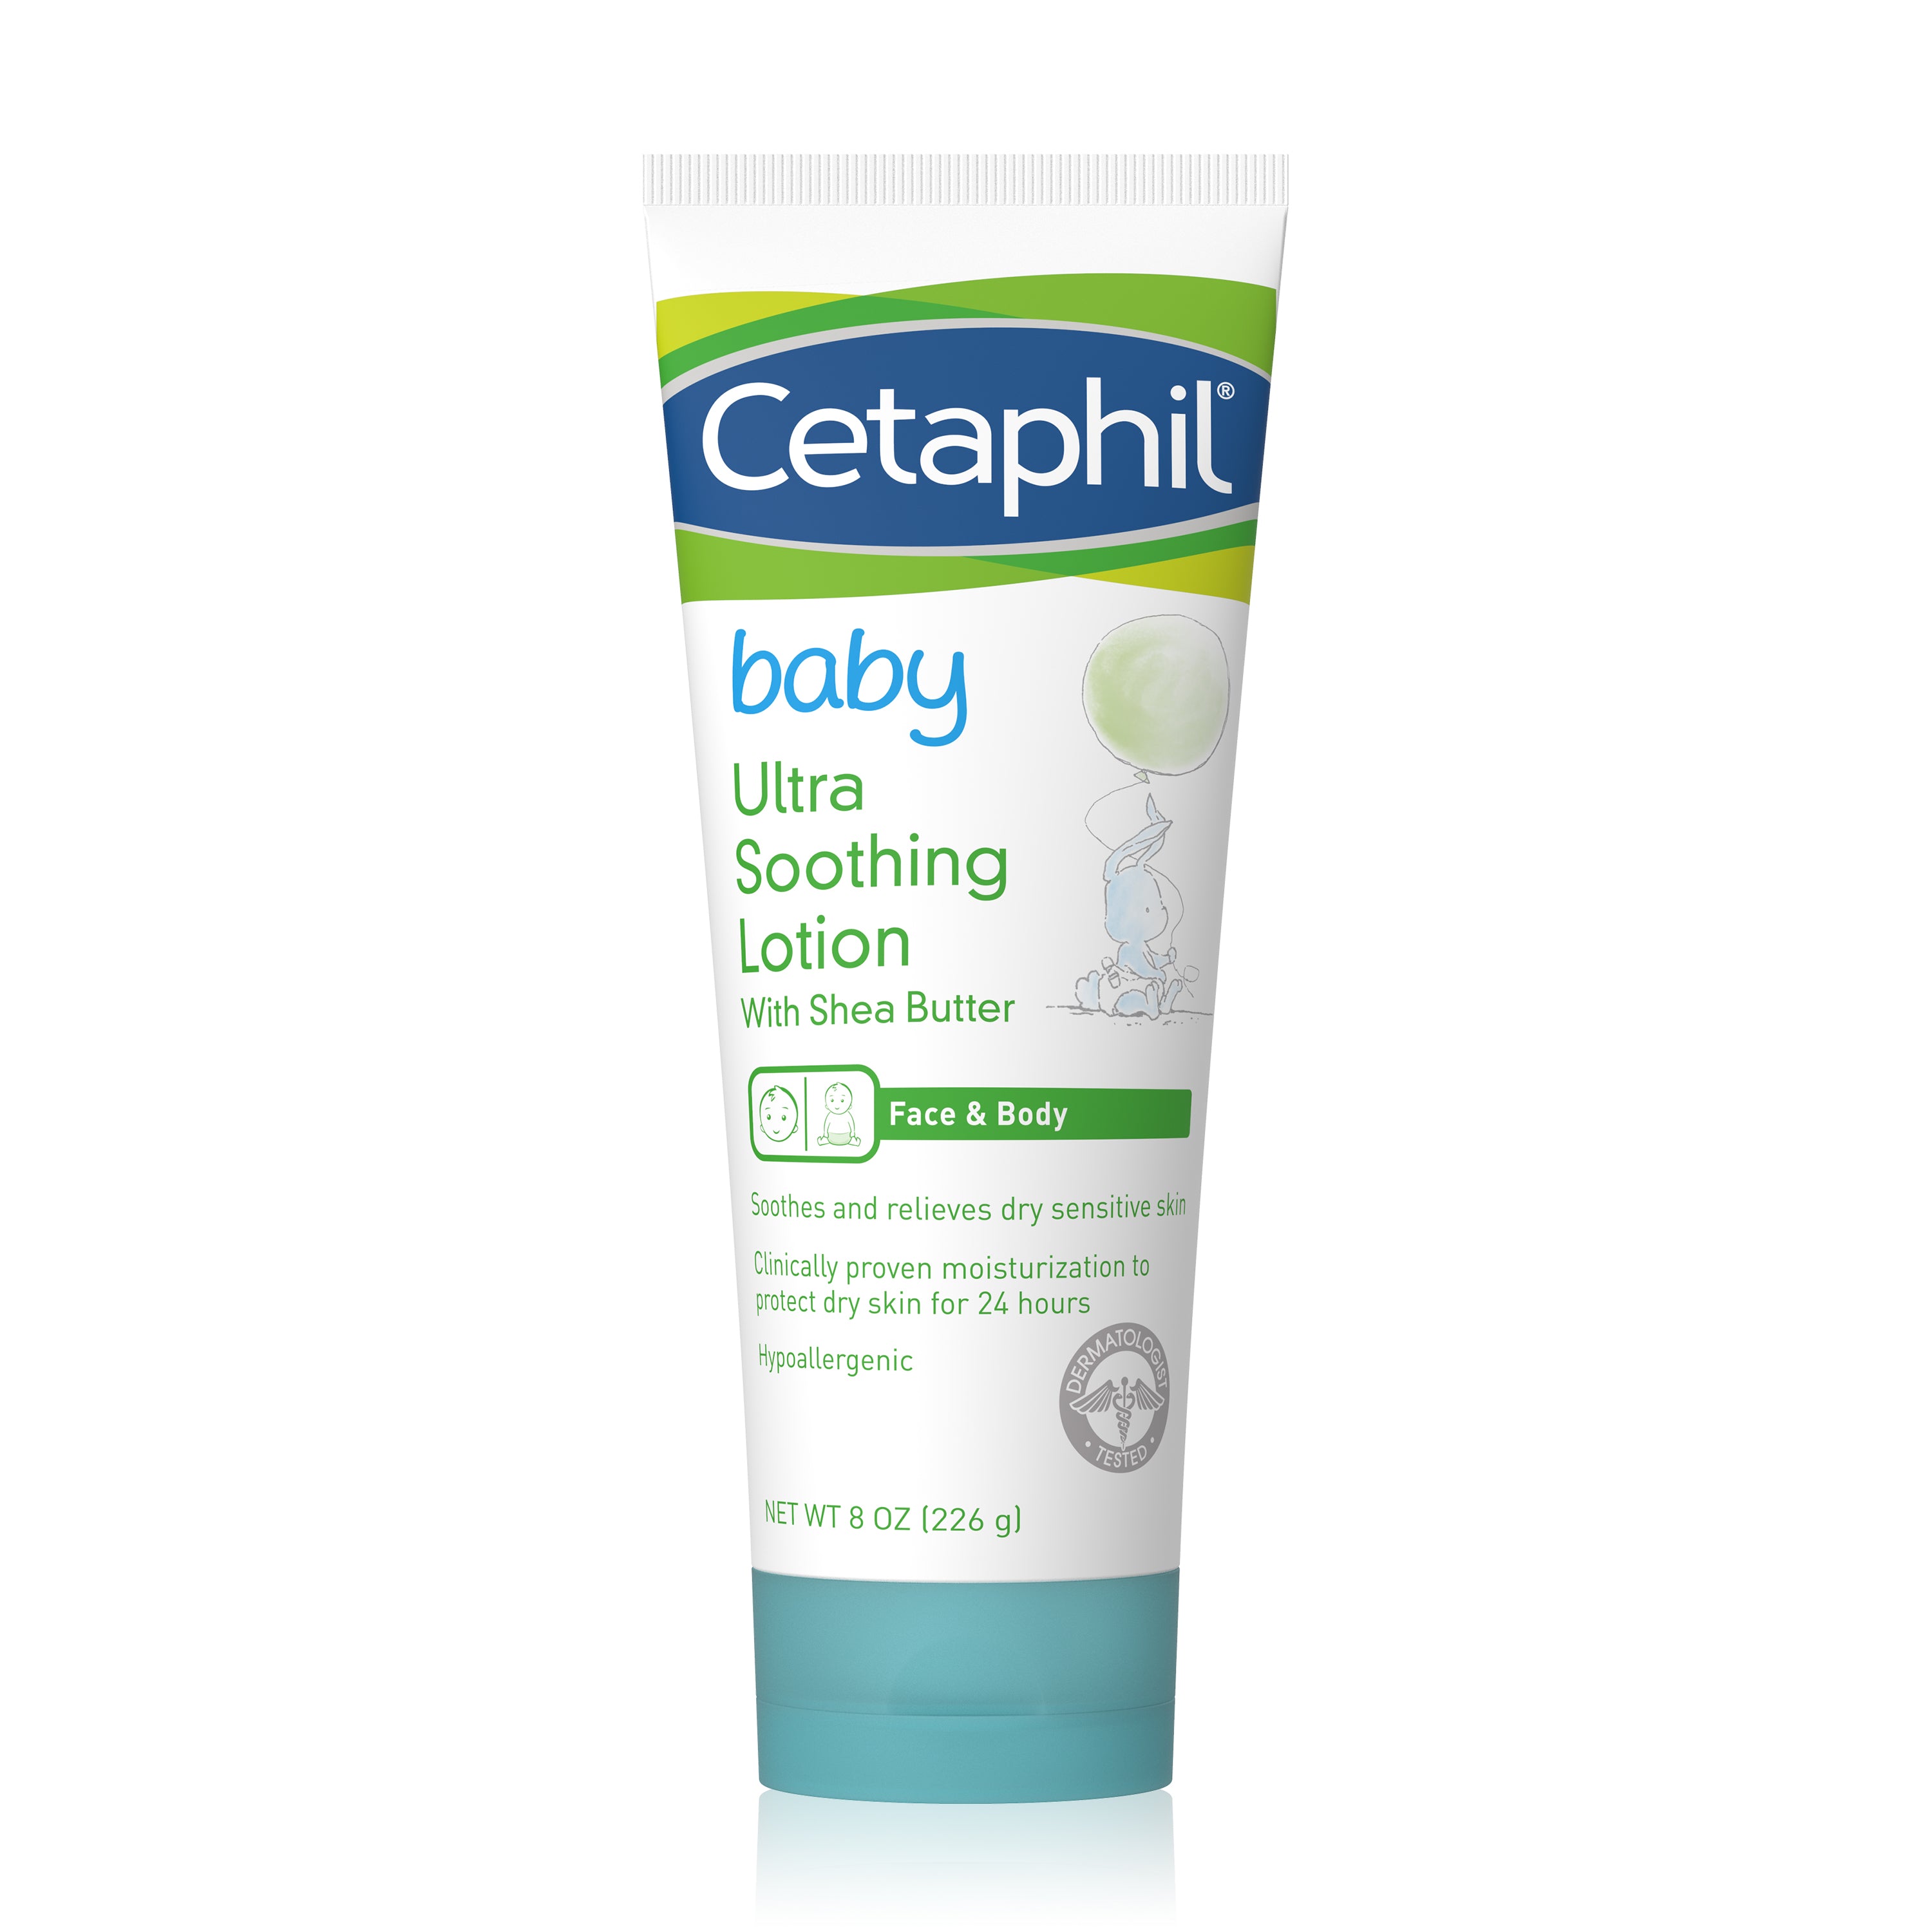 Cetaphil Baby Ultra Soothing Lotion with Shea Butter, 8oz